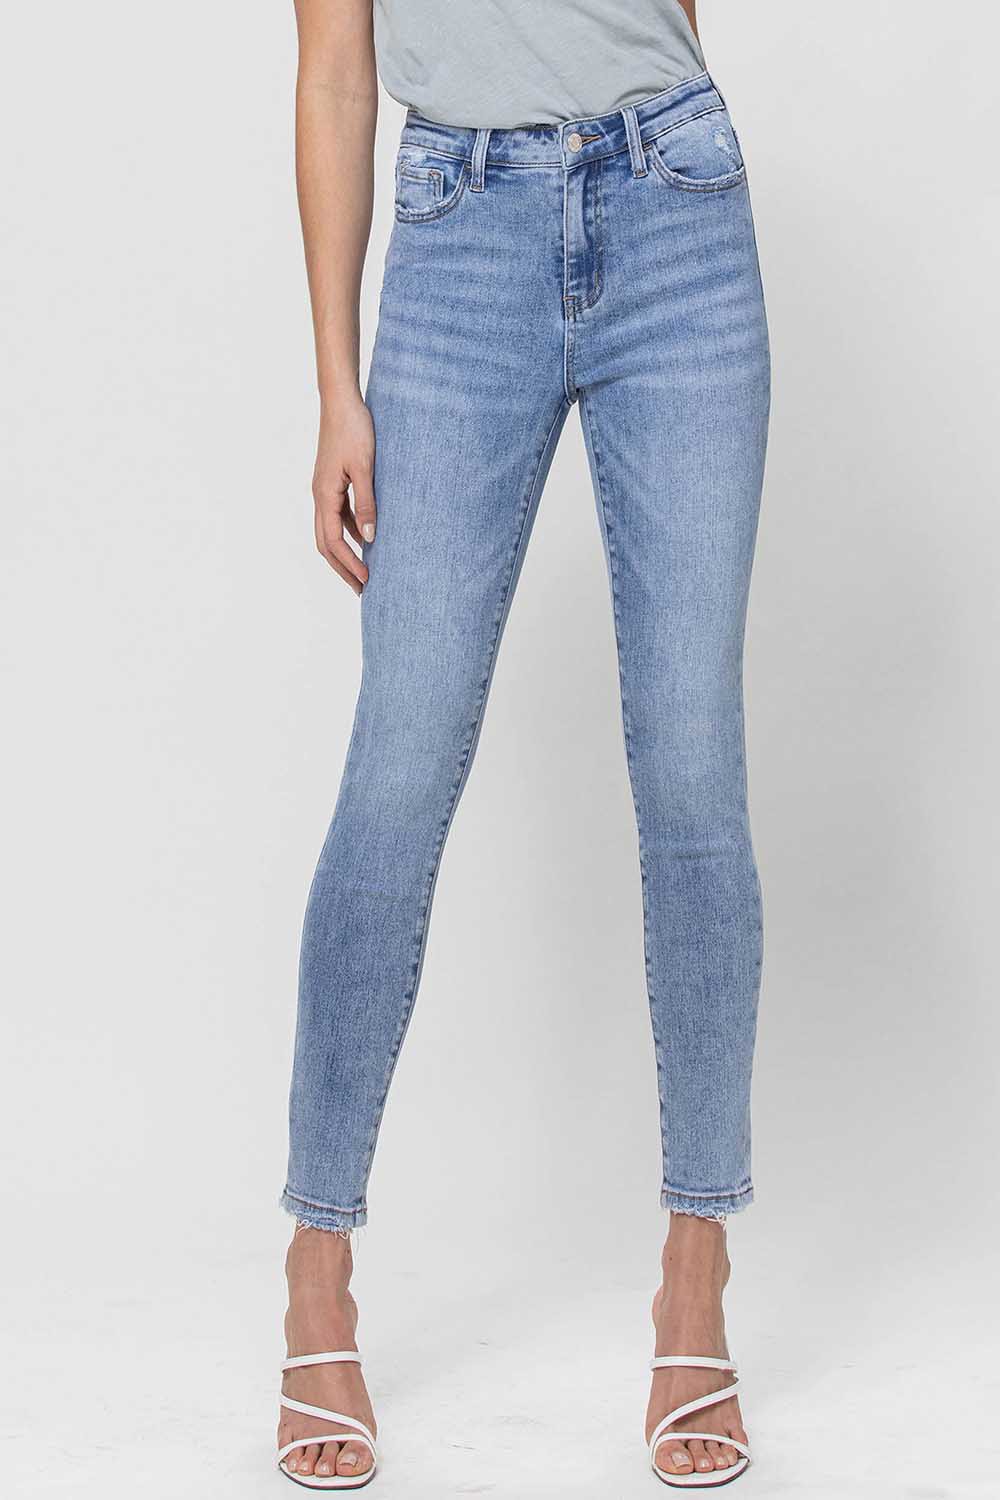 90s High Rise Skinny Jeans in Light Wash